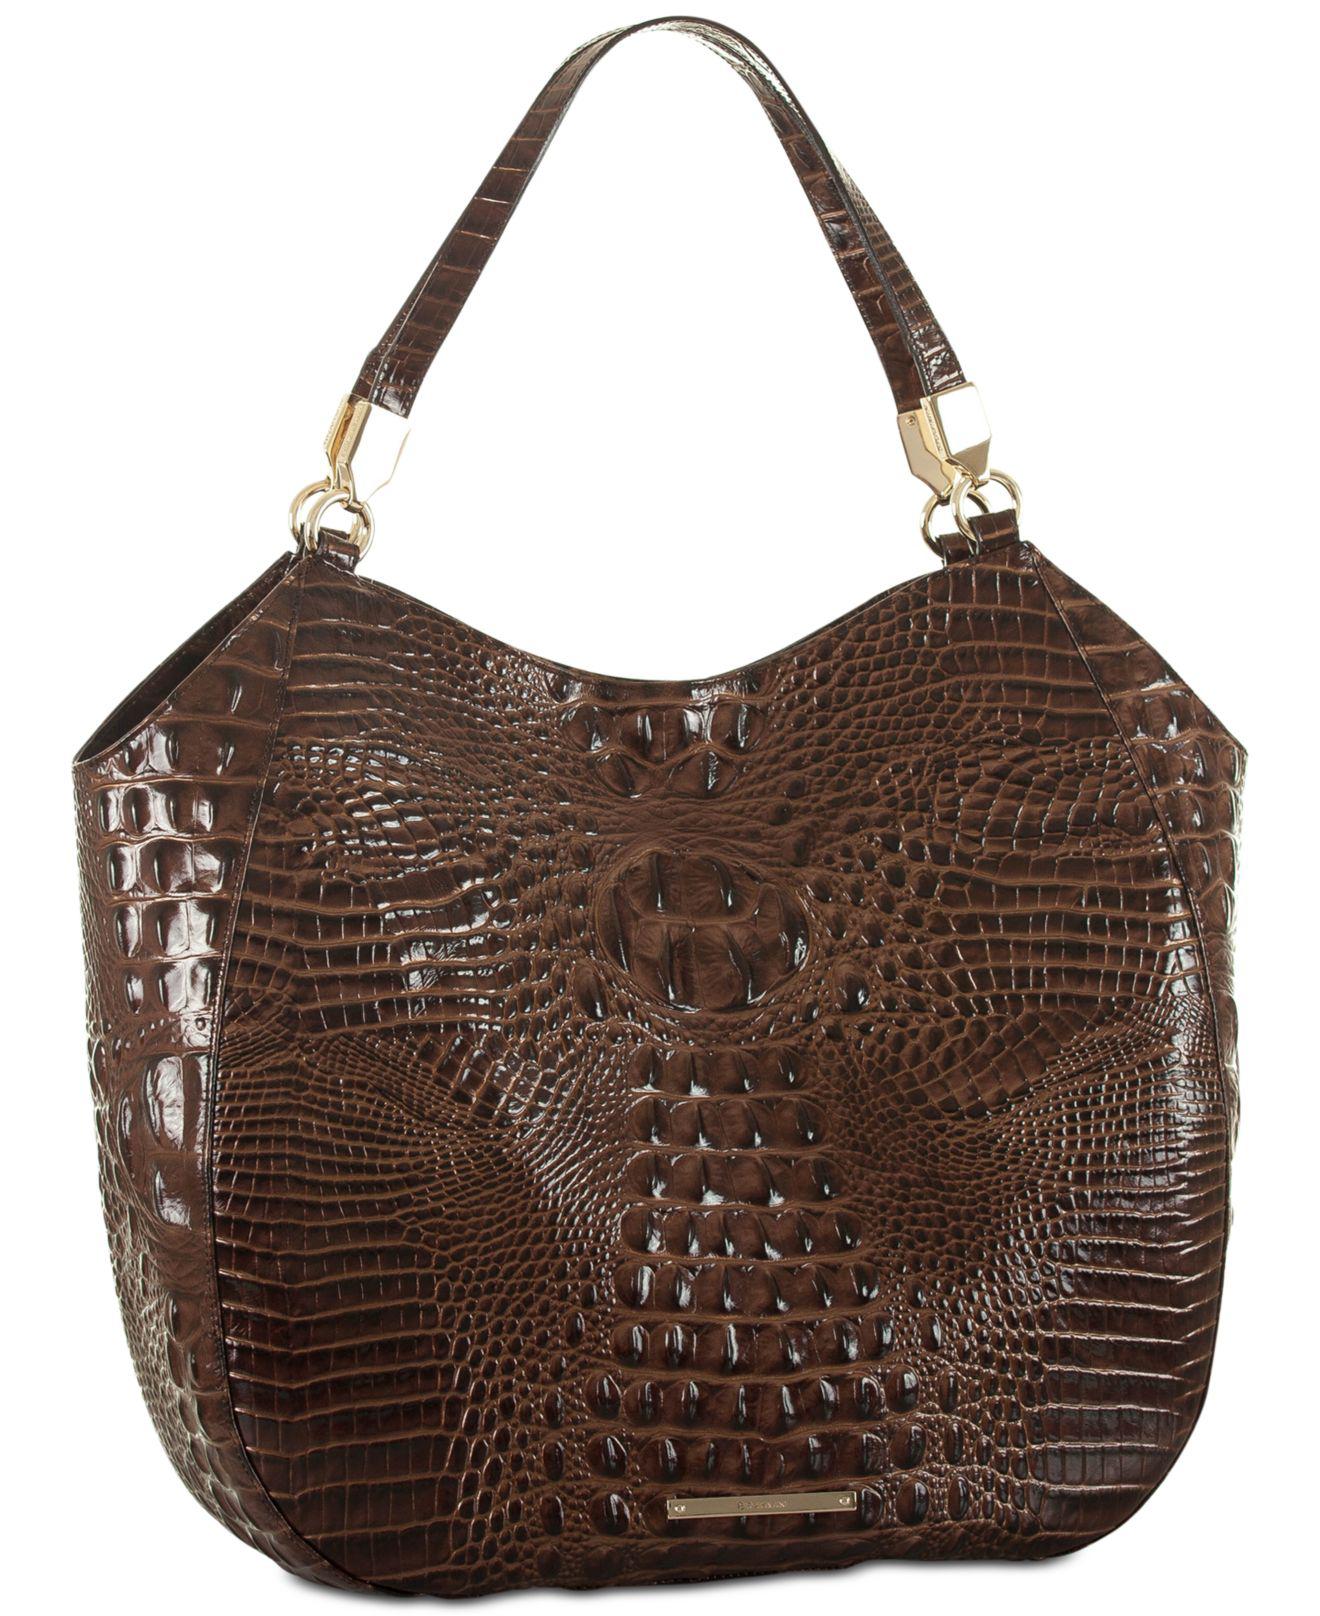 Brahmin Leather Thelma Extra-large Tote in Chestnut (Brown) - Lyst